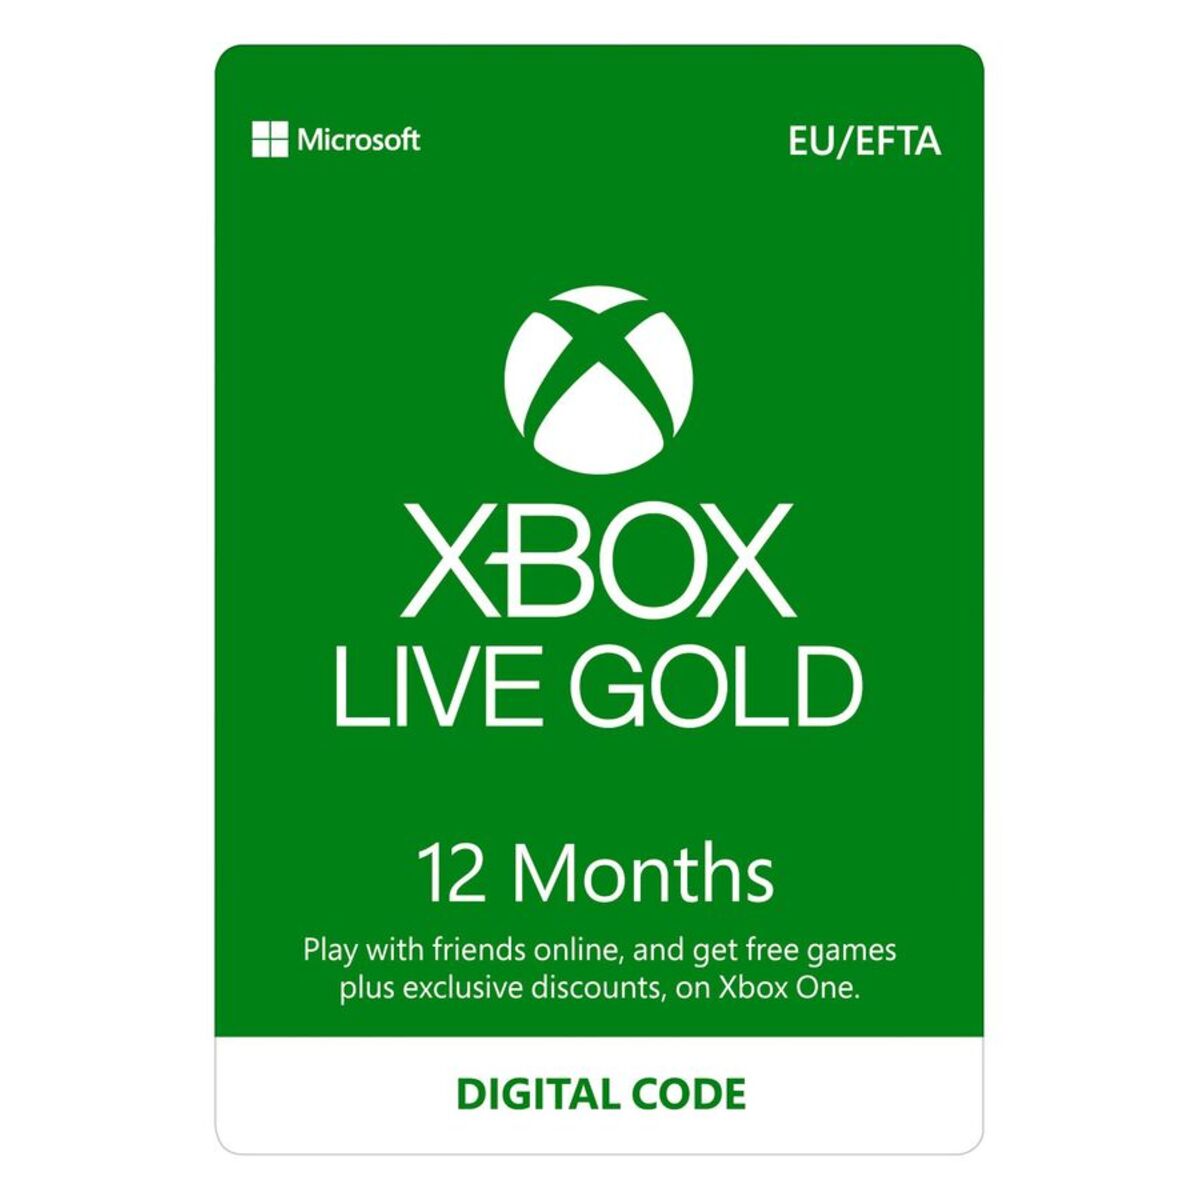 xbox live gold paypal